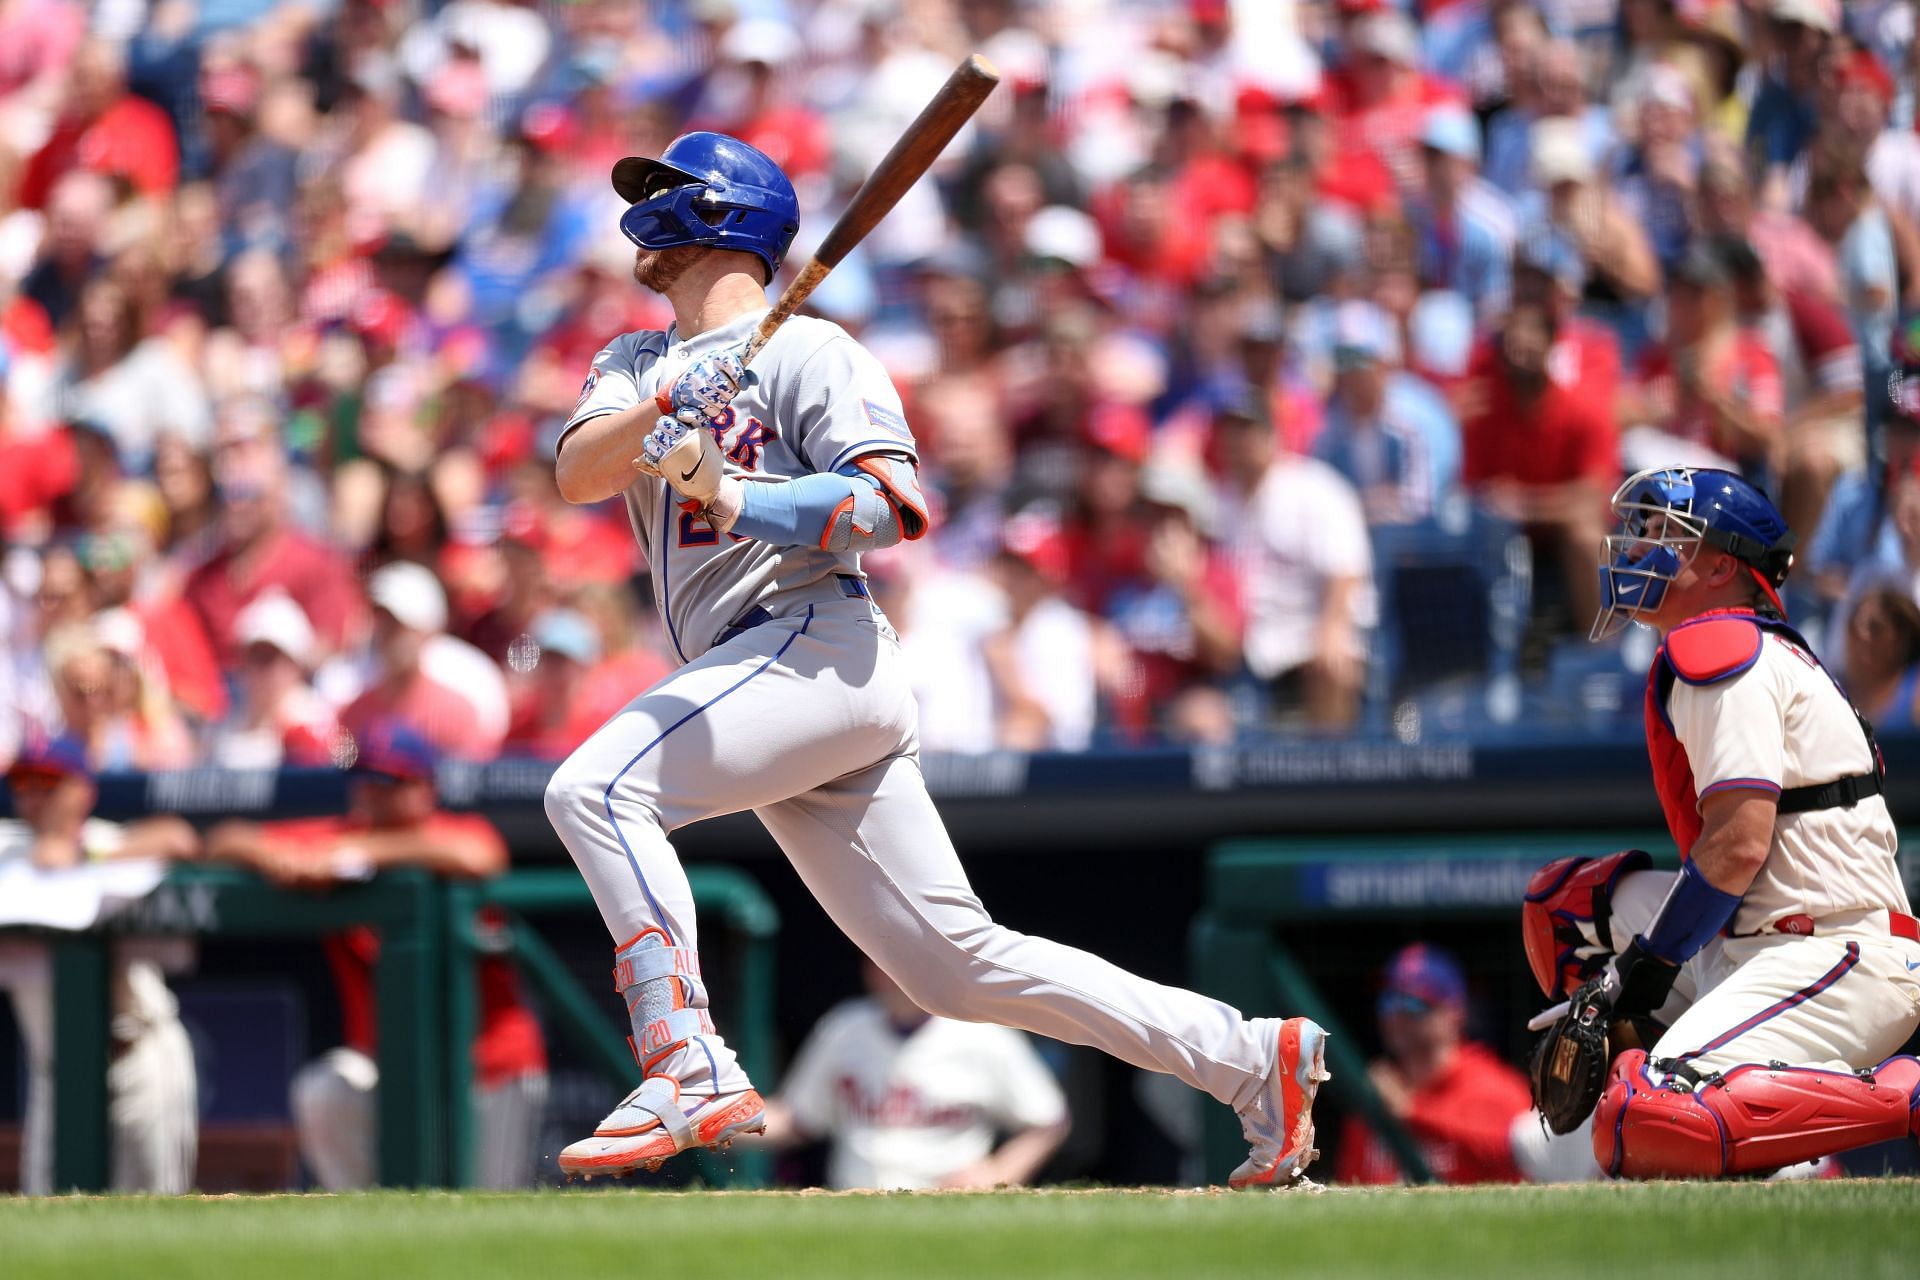 pete alonso home run derby eyes closed